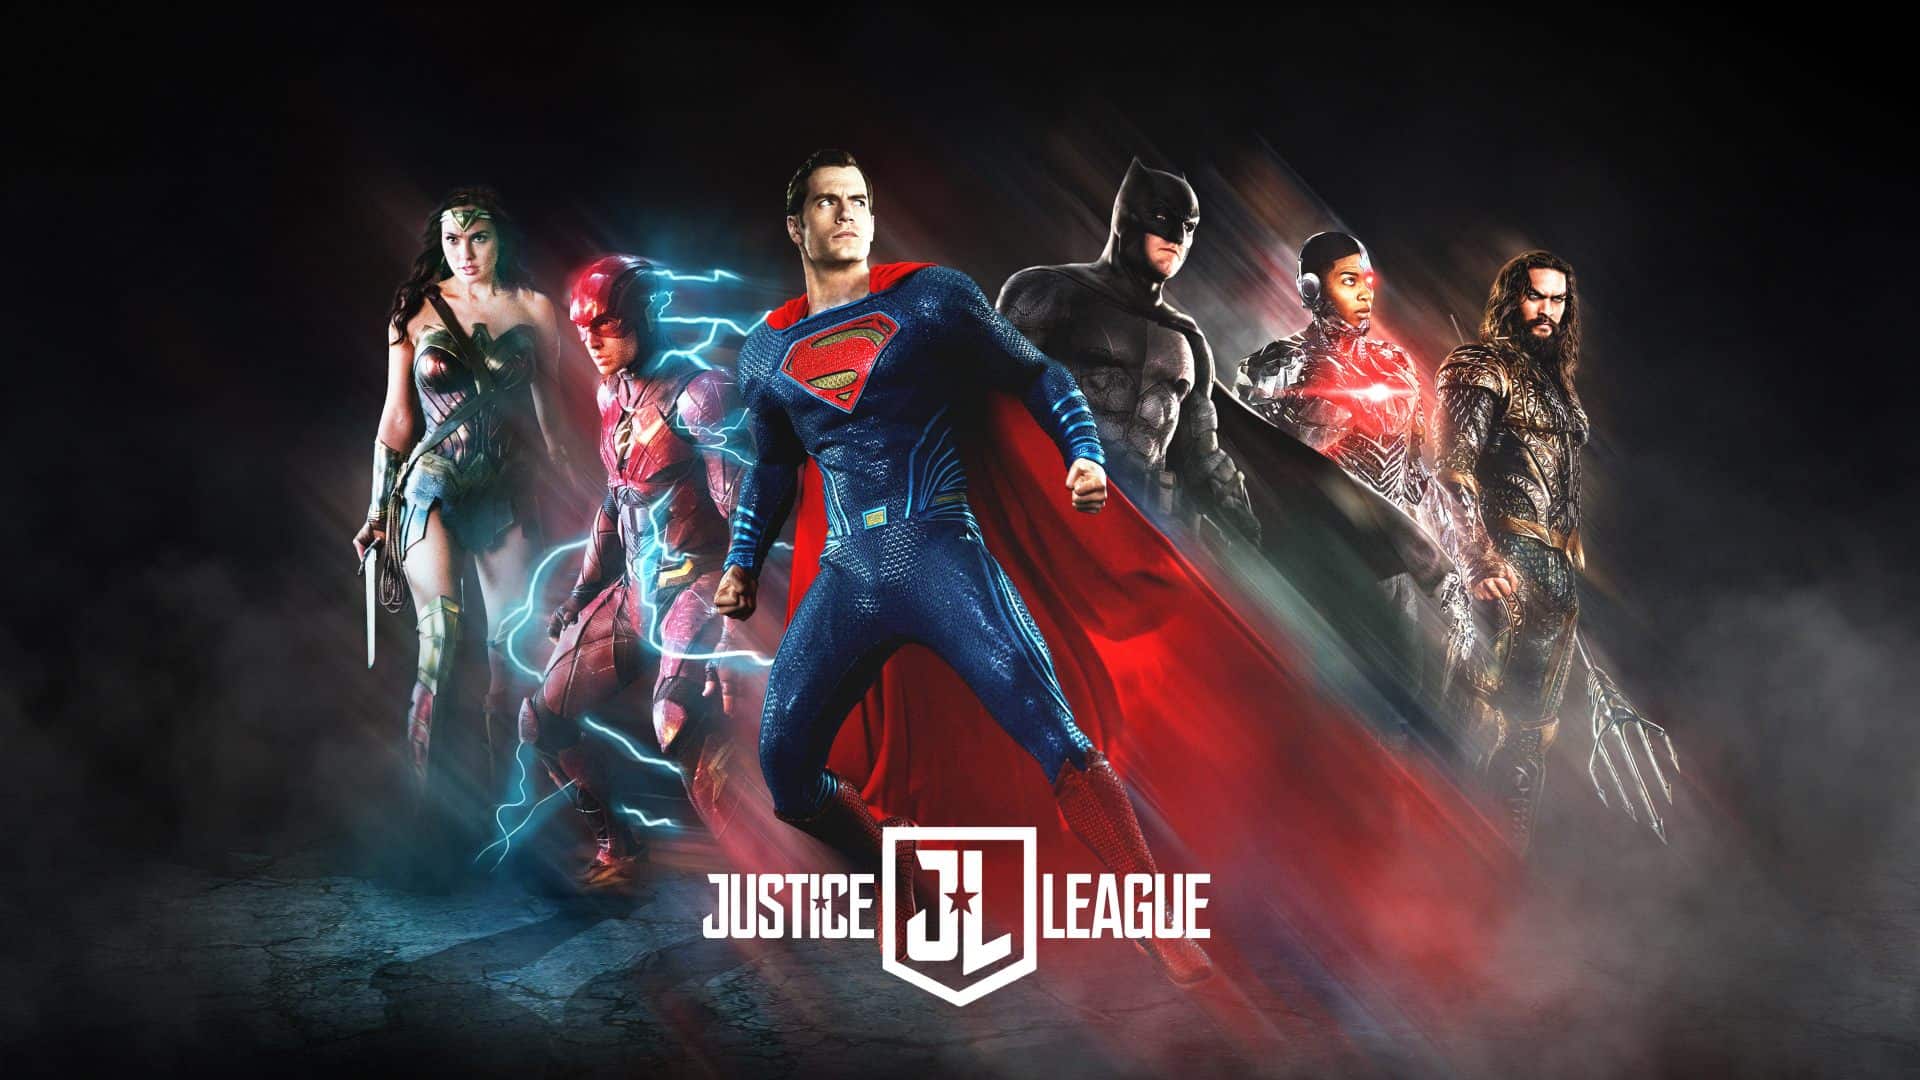 Justice League (2017) Bluray HDR Download Google Drive 4K